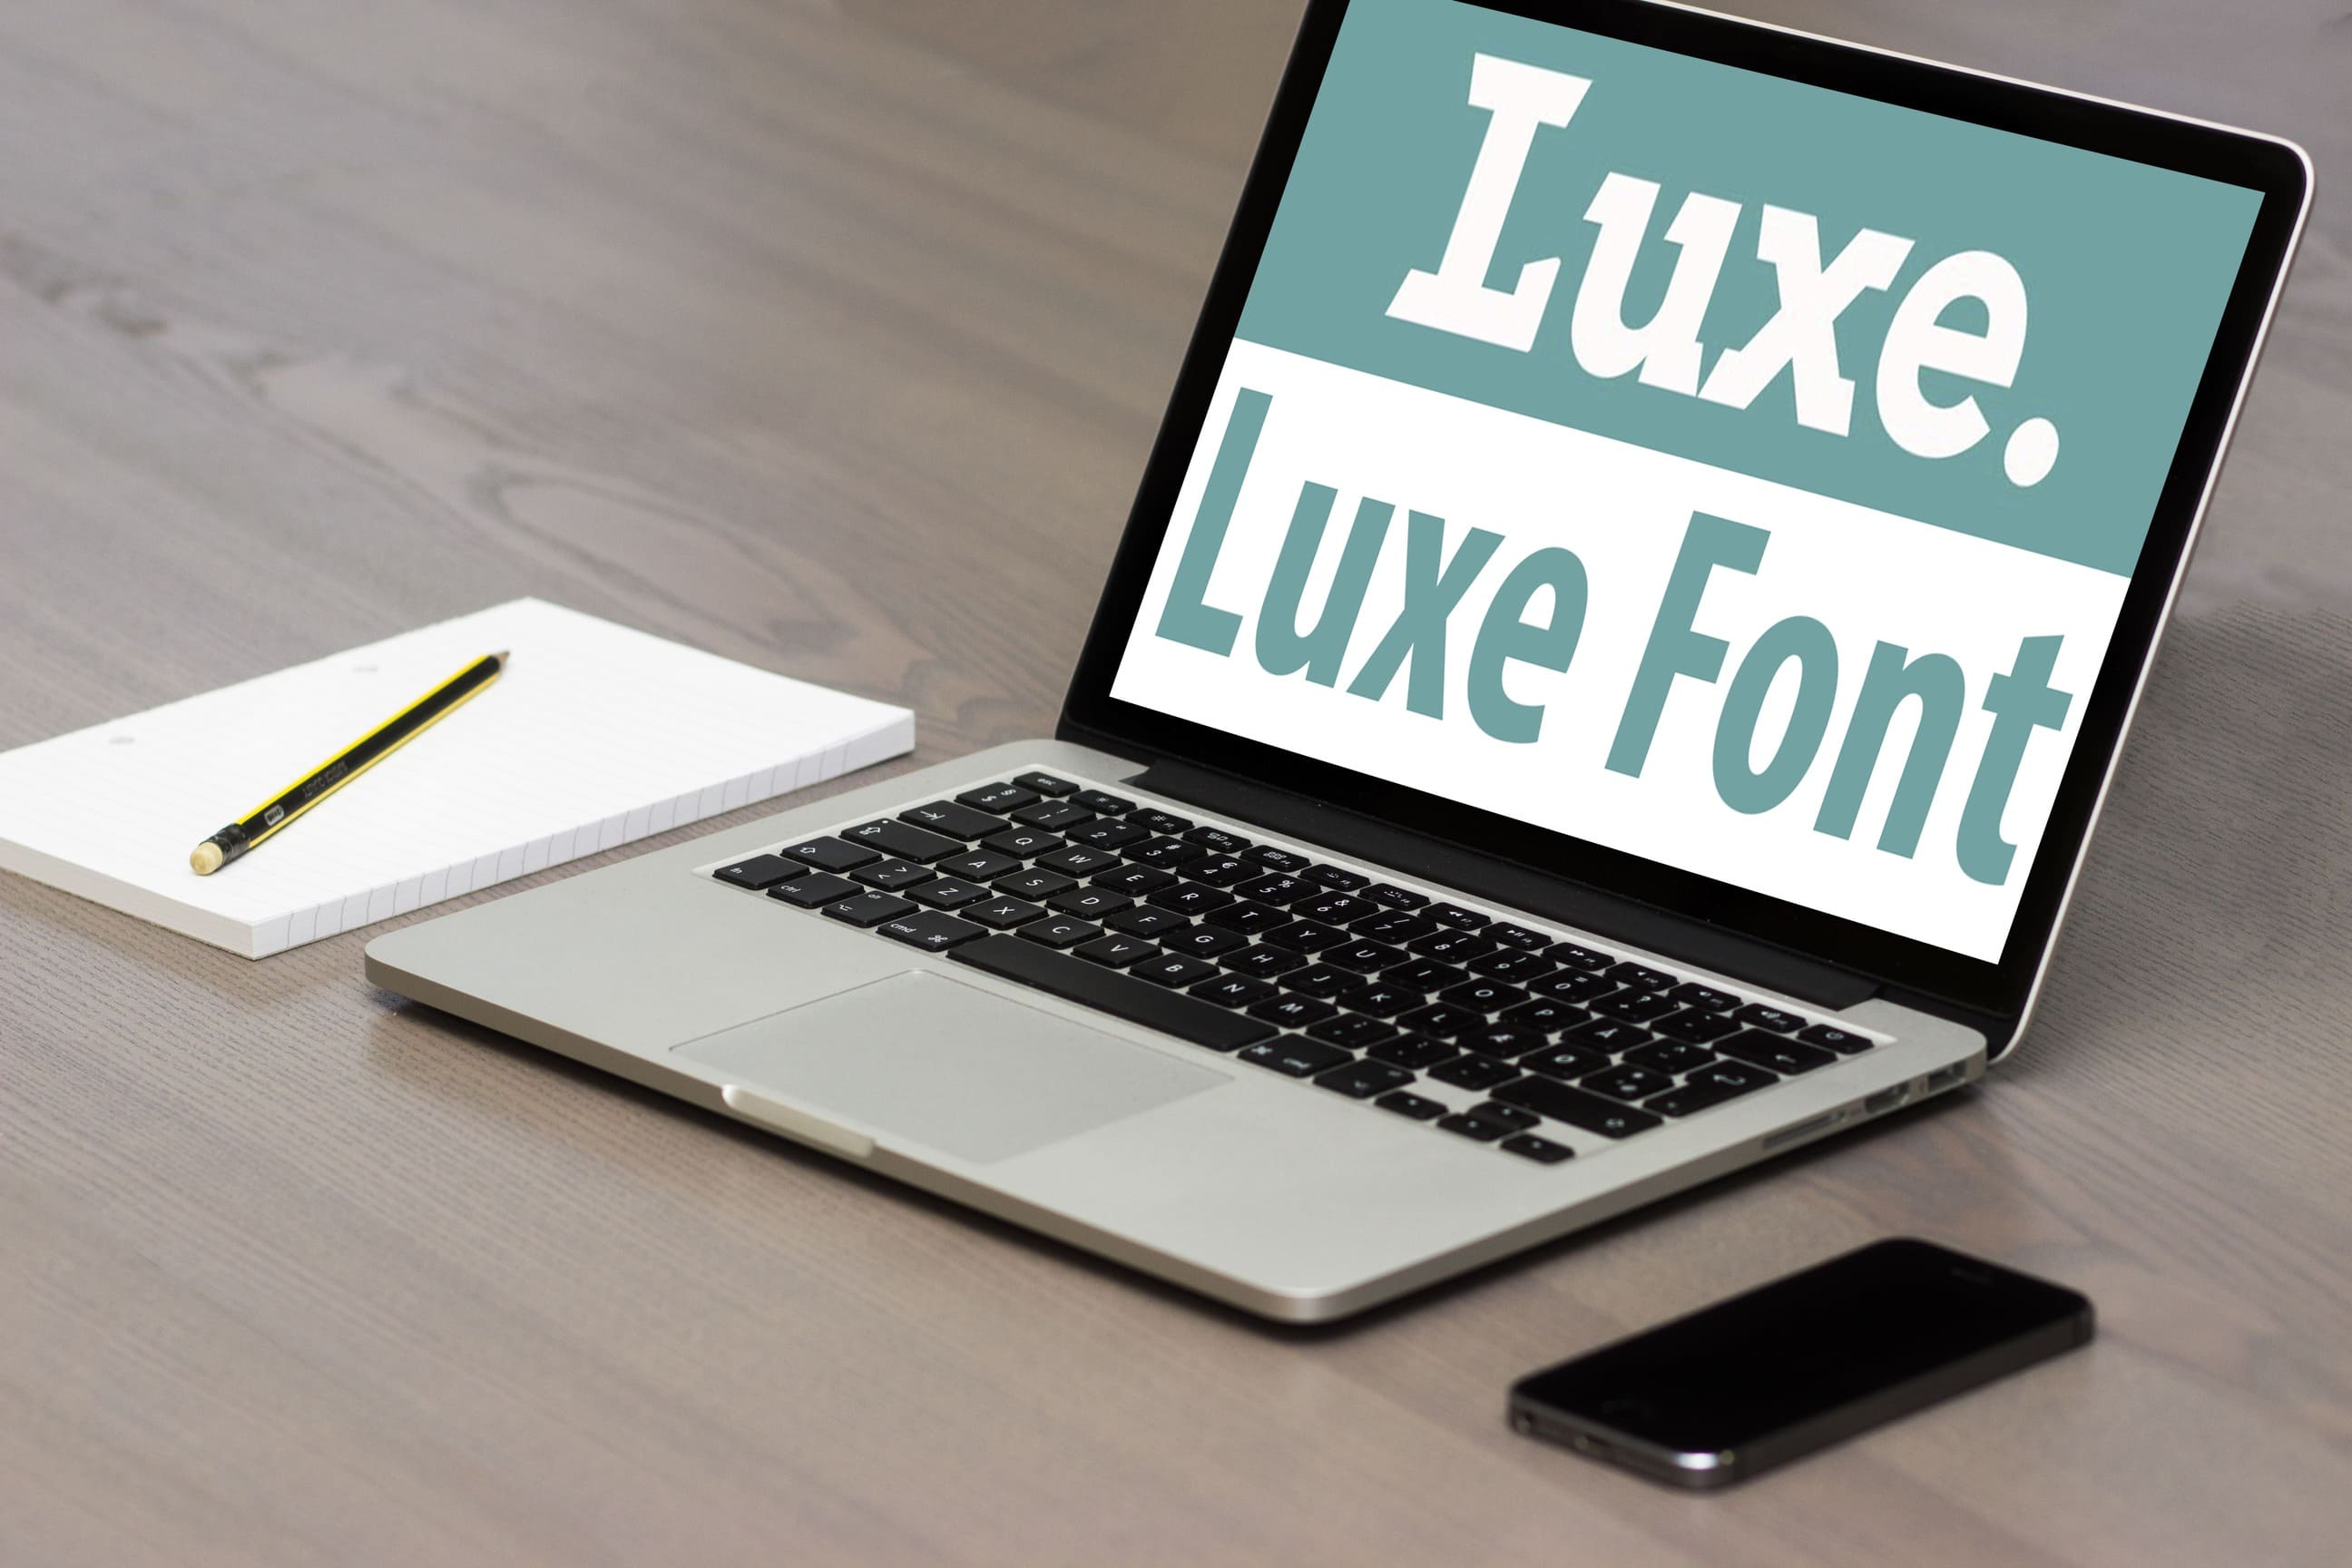 Luxe - Luxe Font On The Laptop.